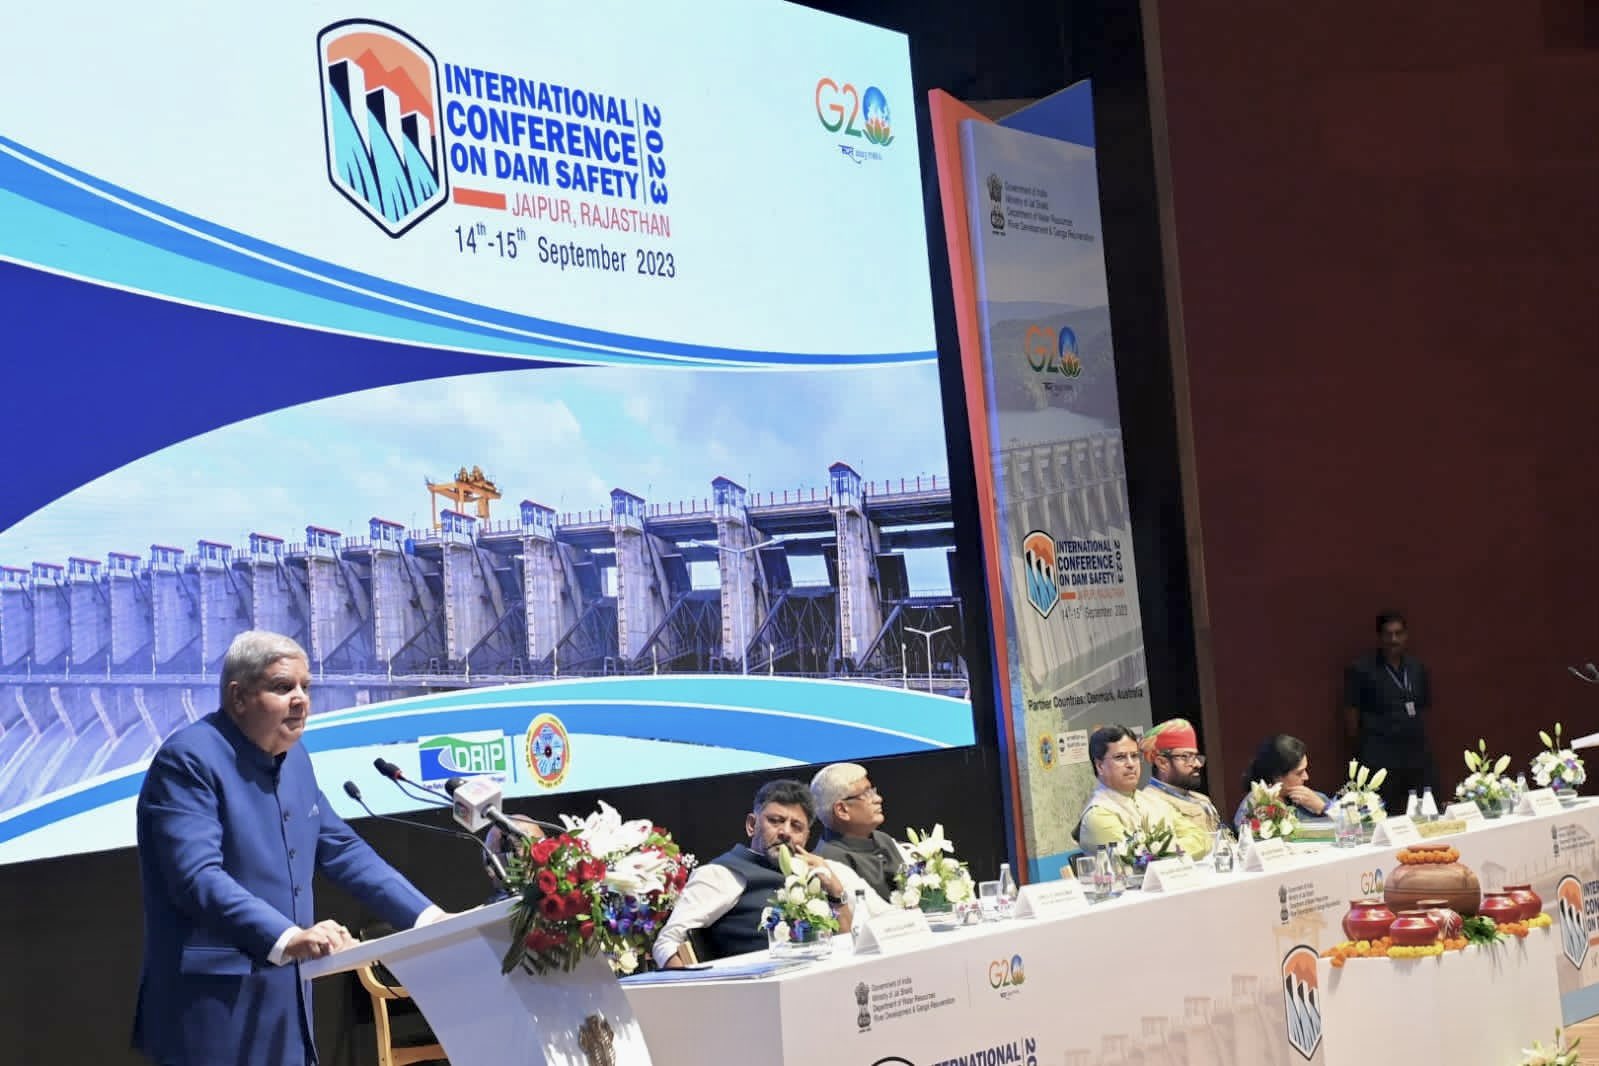 The Vice-President, Shri Jagdeep Dhankhar addressing the gathering at the International Conference on Dam Safety in Jaipur, Rajasthan on September 14, 2023.